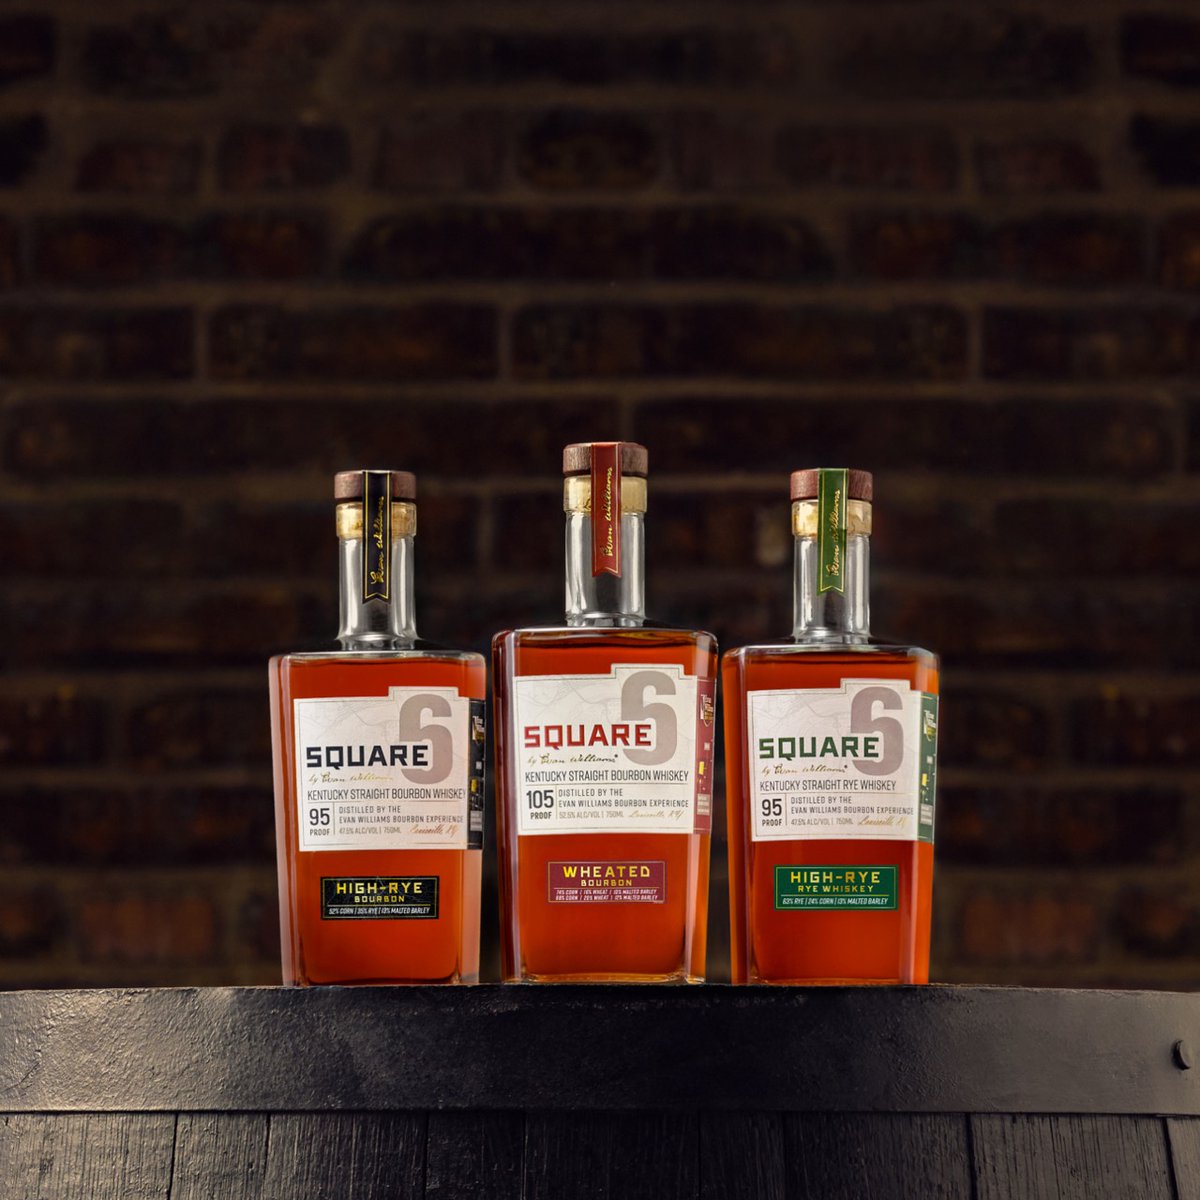 Did you know we produce our Square 6 series exclusively at the Evan Williams Bourbon Experience’s artisanal distillery? Visit the link loom.ly/LWPKXQU to learn more about planning your trip.